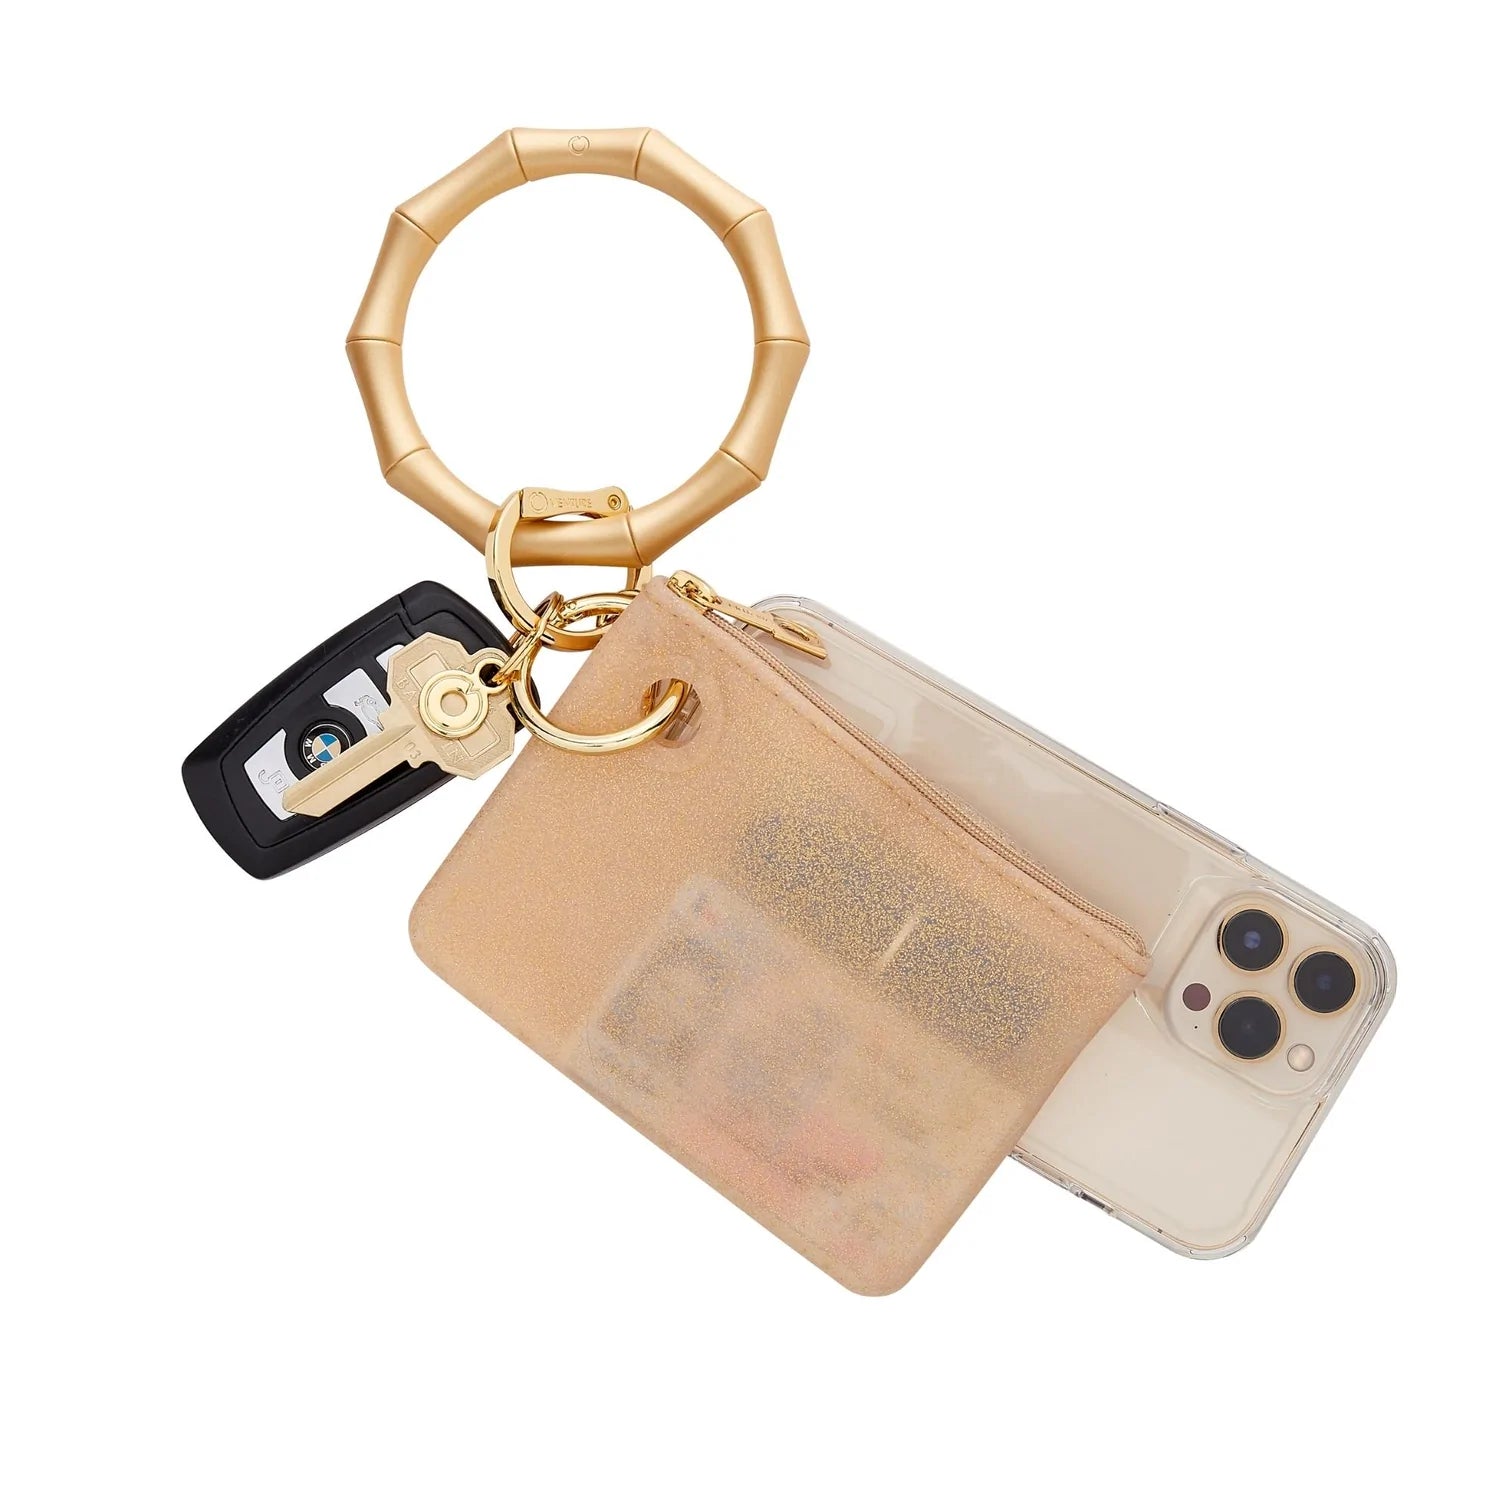 Hook Me Up Hands-Free Key Ring Phone Connector - Gold Rush